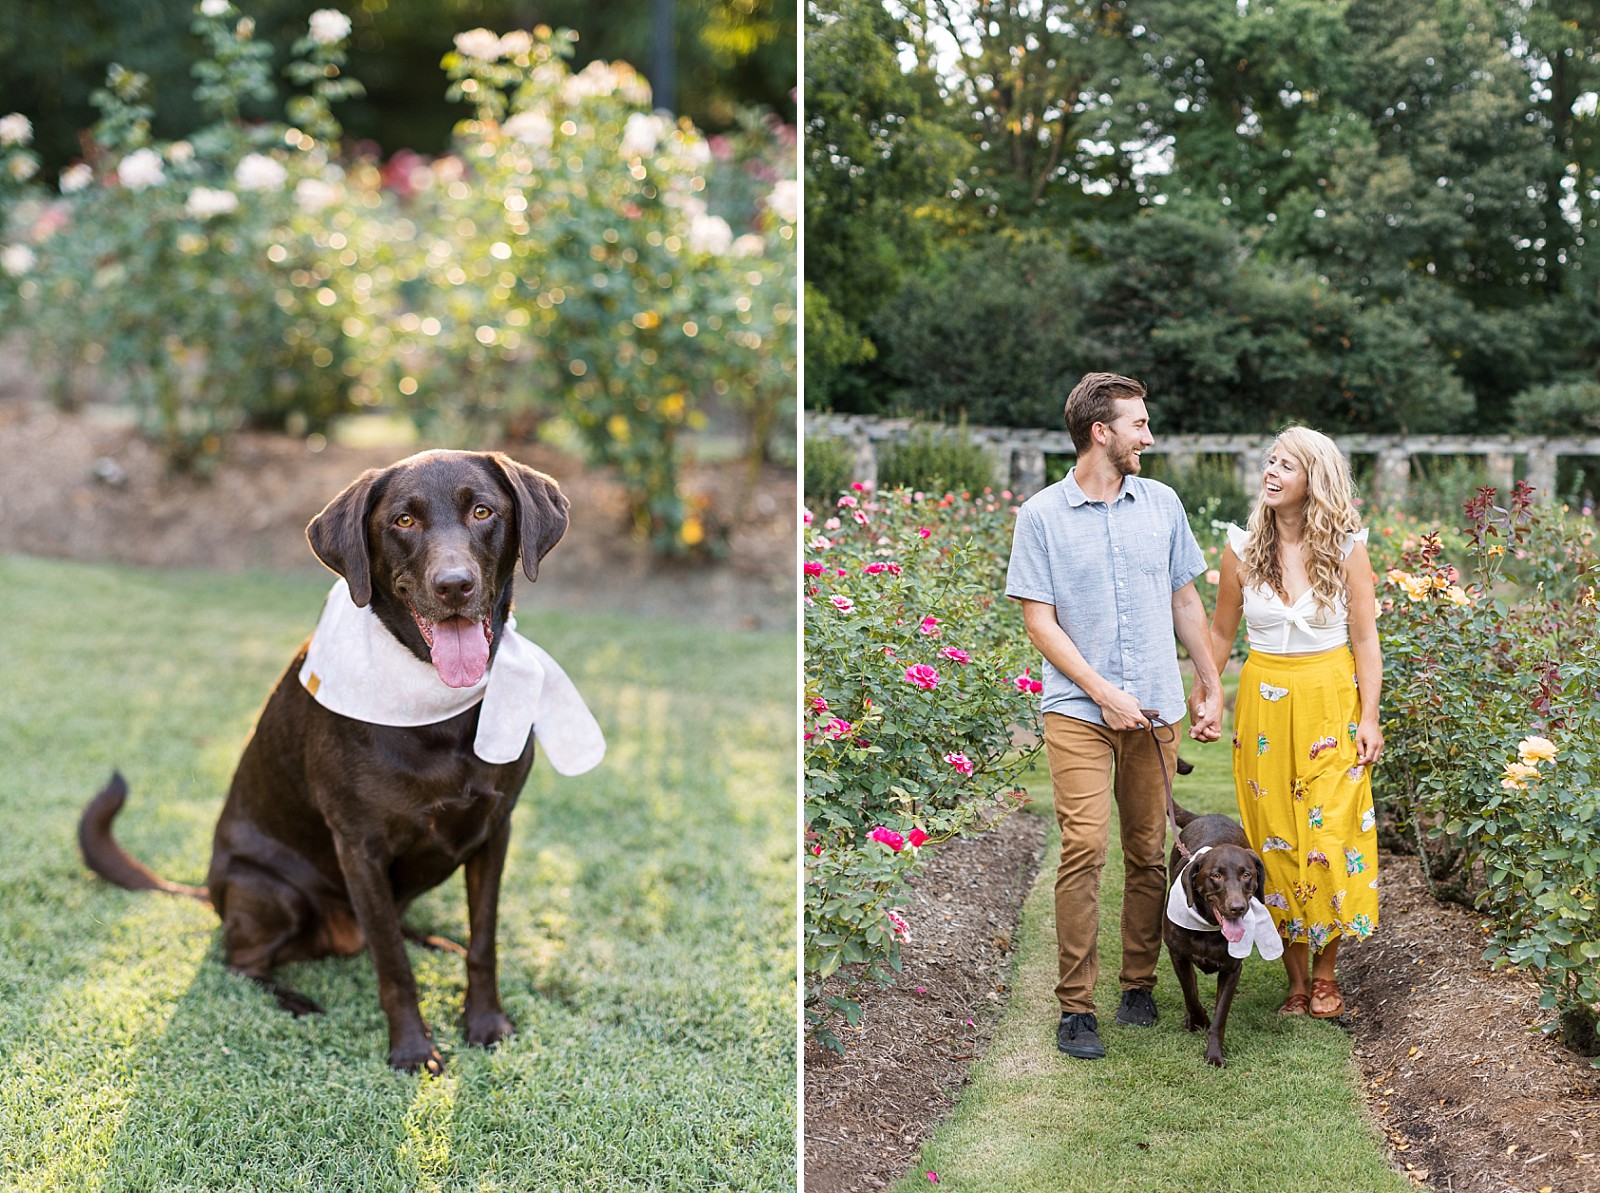 Chocolate lab weaaring a bandana and couple waling the gardens with their dog | Raleigh Rose Garden Anniversary Photos | Raleigh Portrait Photographer | Raleigh NC Wedding Photographer